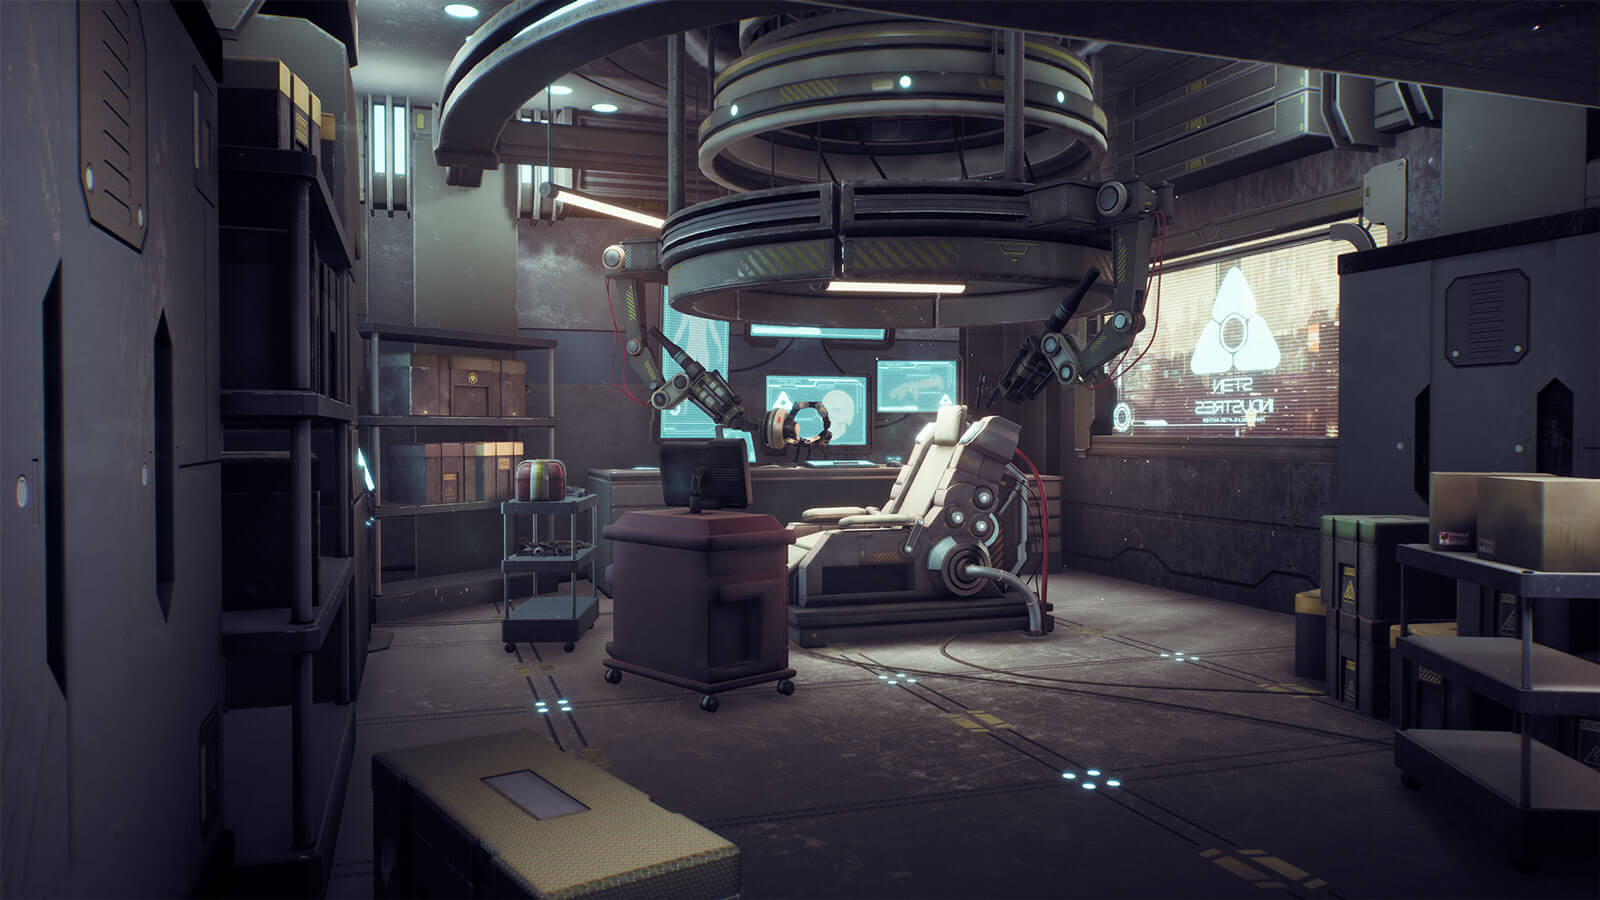 A panned out view of a massive futuristic laboratory with various machinery on the floor and ceiling